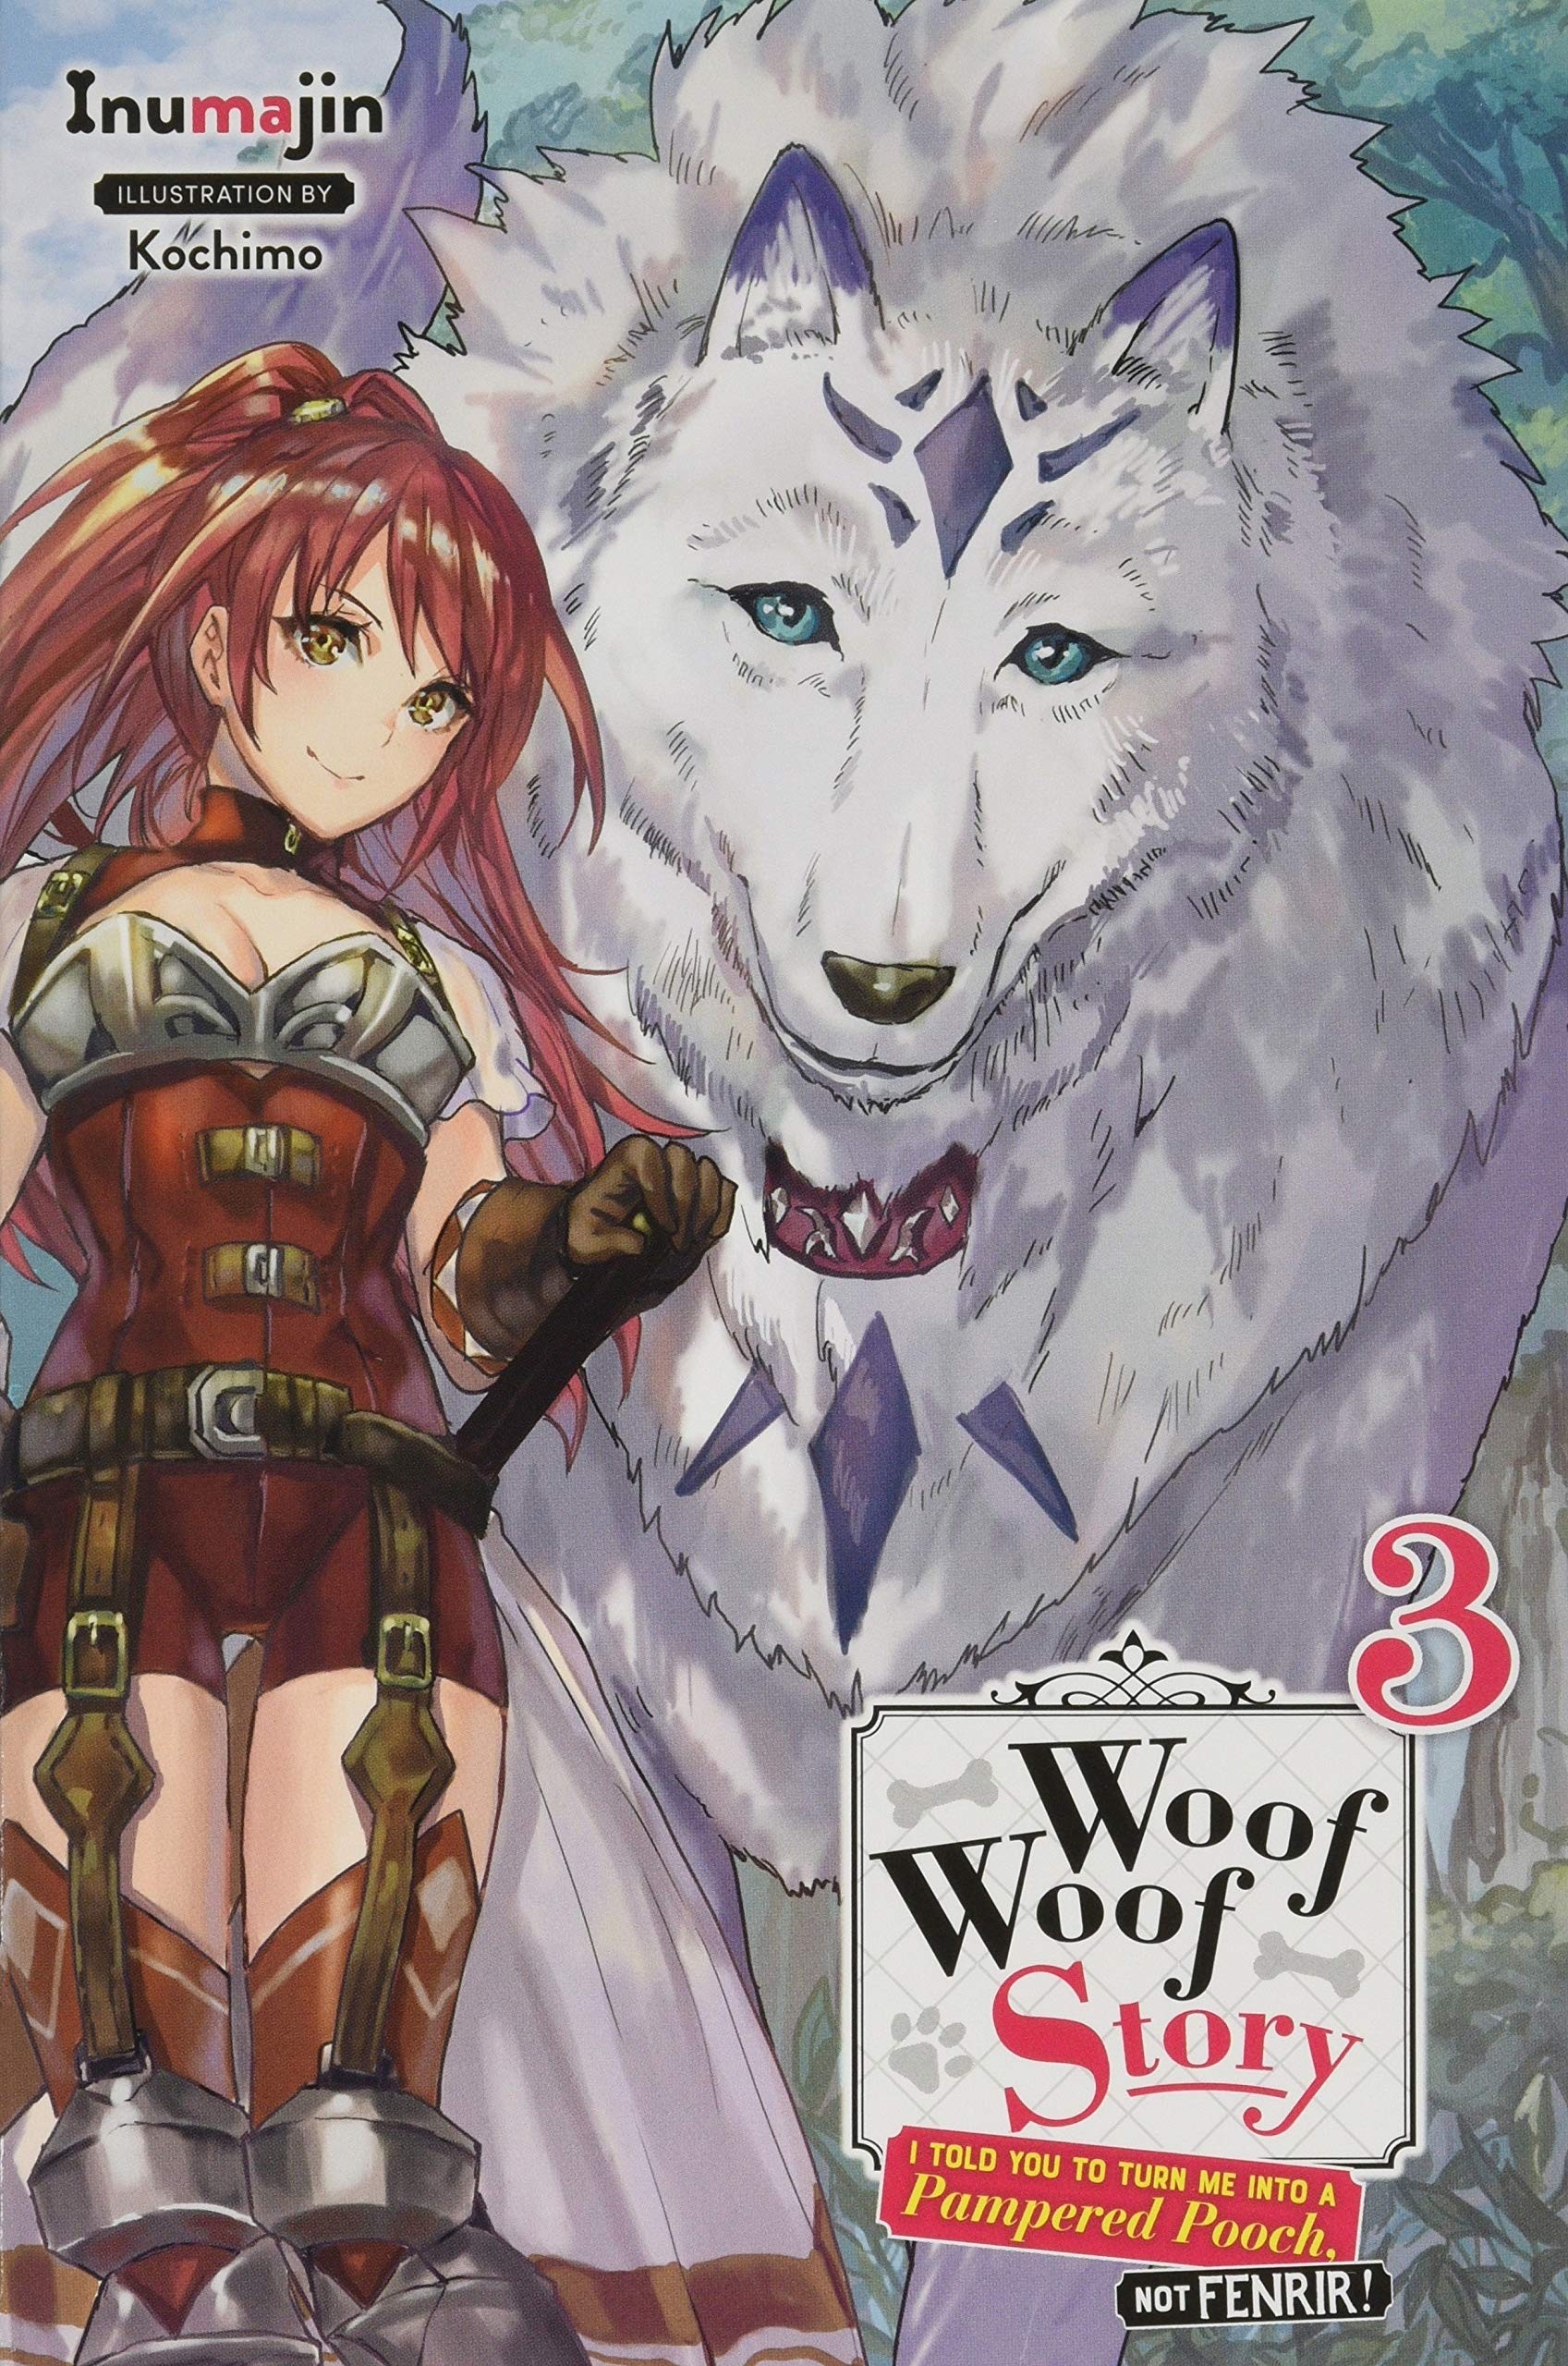 Woof Woof Story: I Told You to Turn Me Into a Pampered Pooch, Not Fenrir!, (Light Novel) Vol. 03